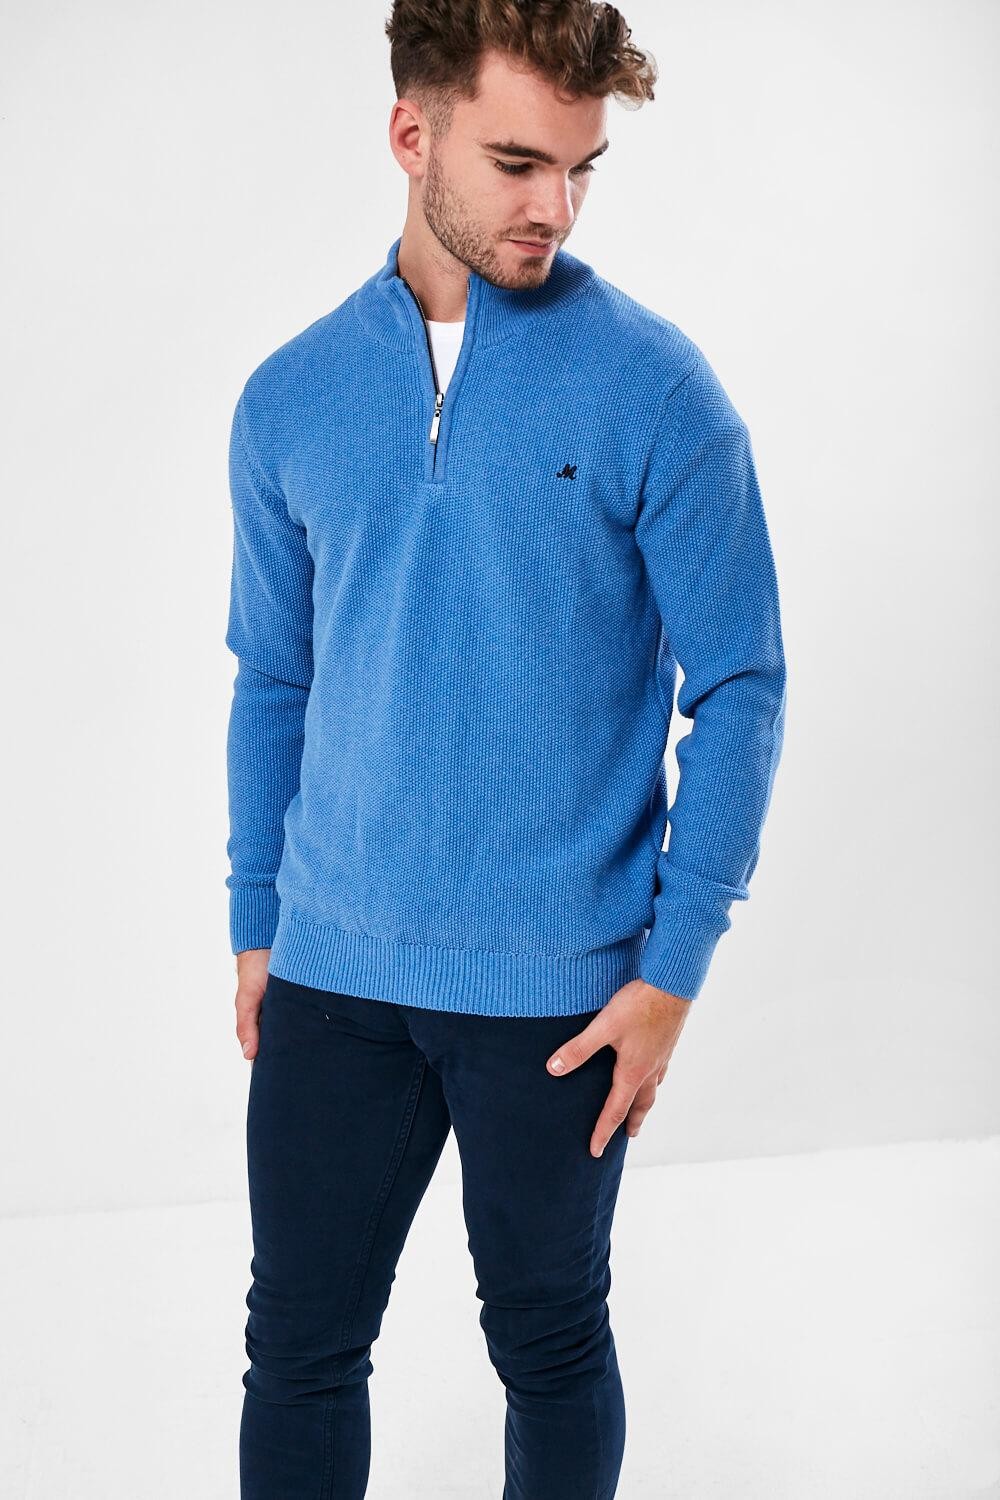 Mineral Kerry Half Zip Knit Jumper in Mid Blue | iCLOTHING